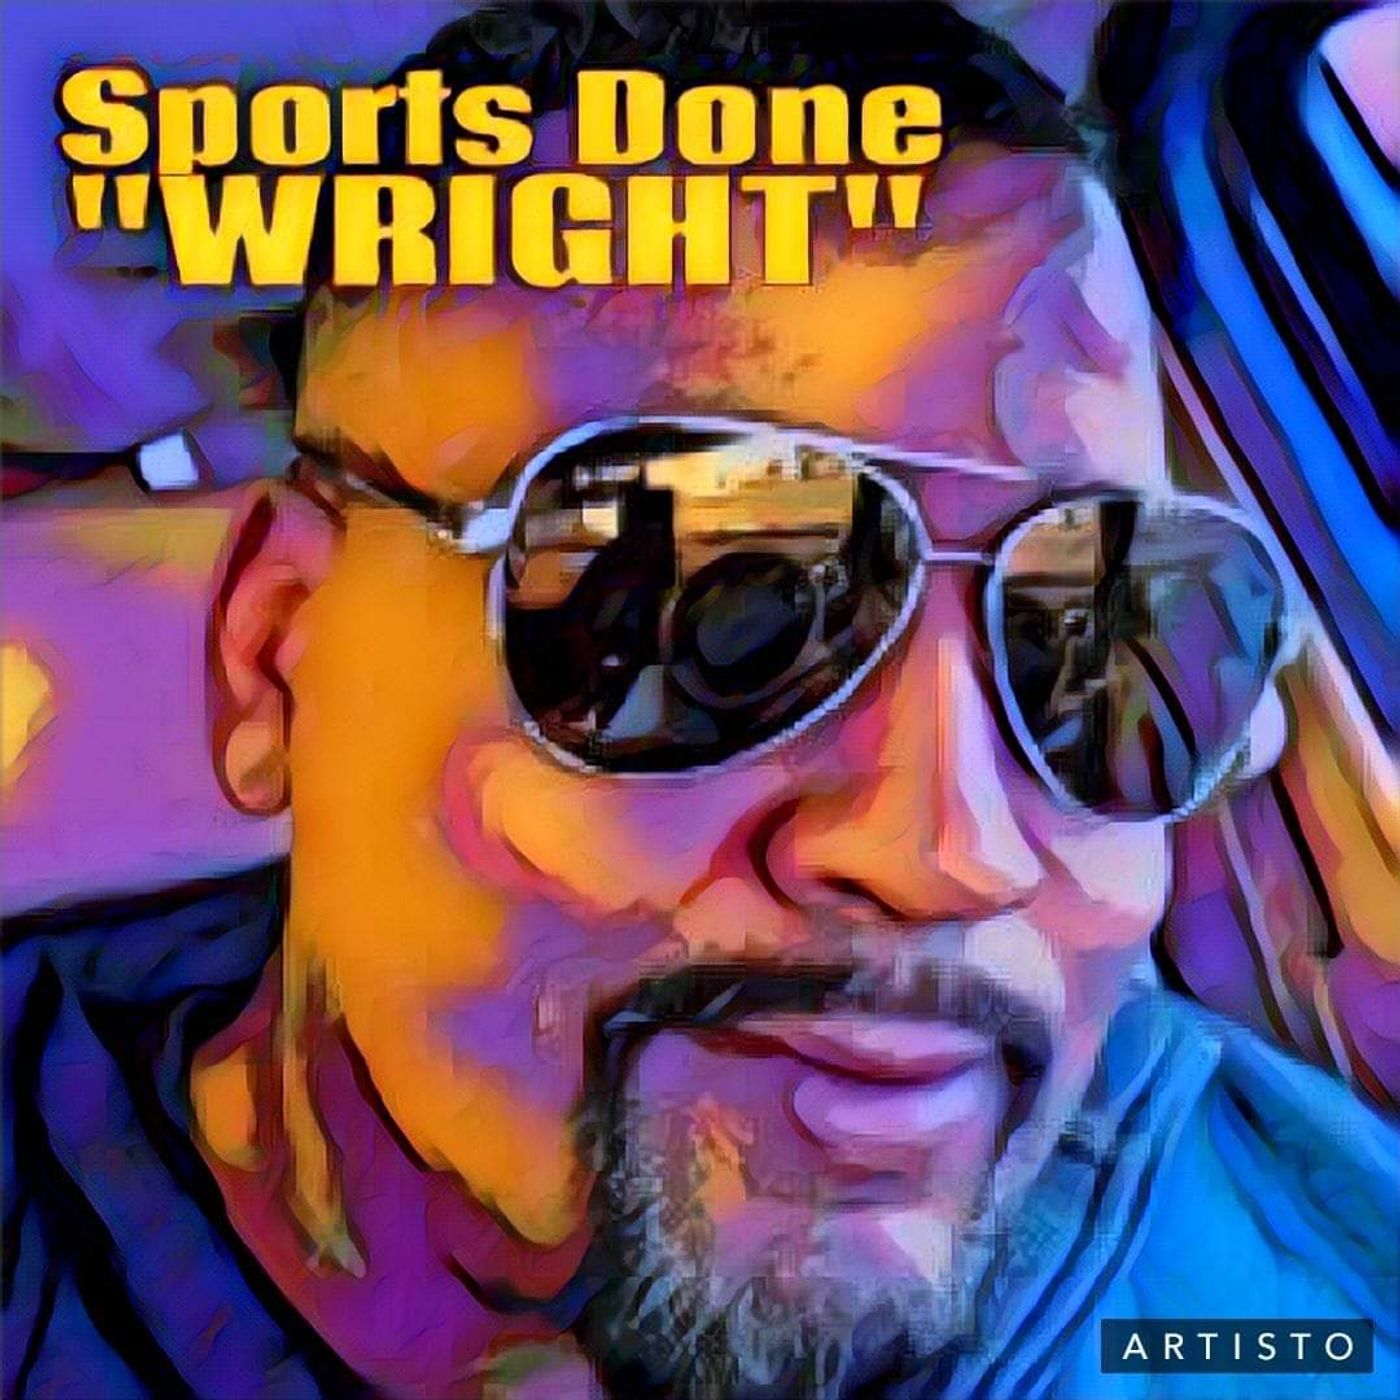 Sports Done Wright